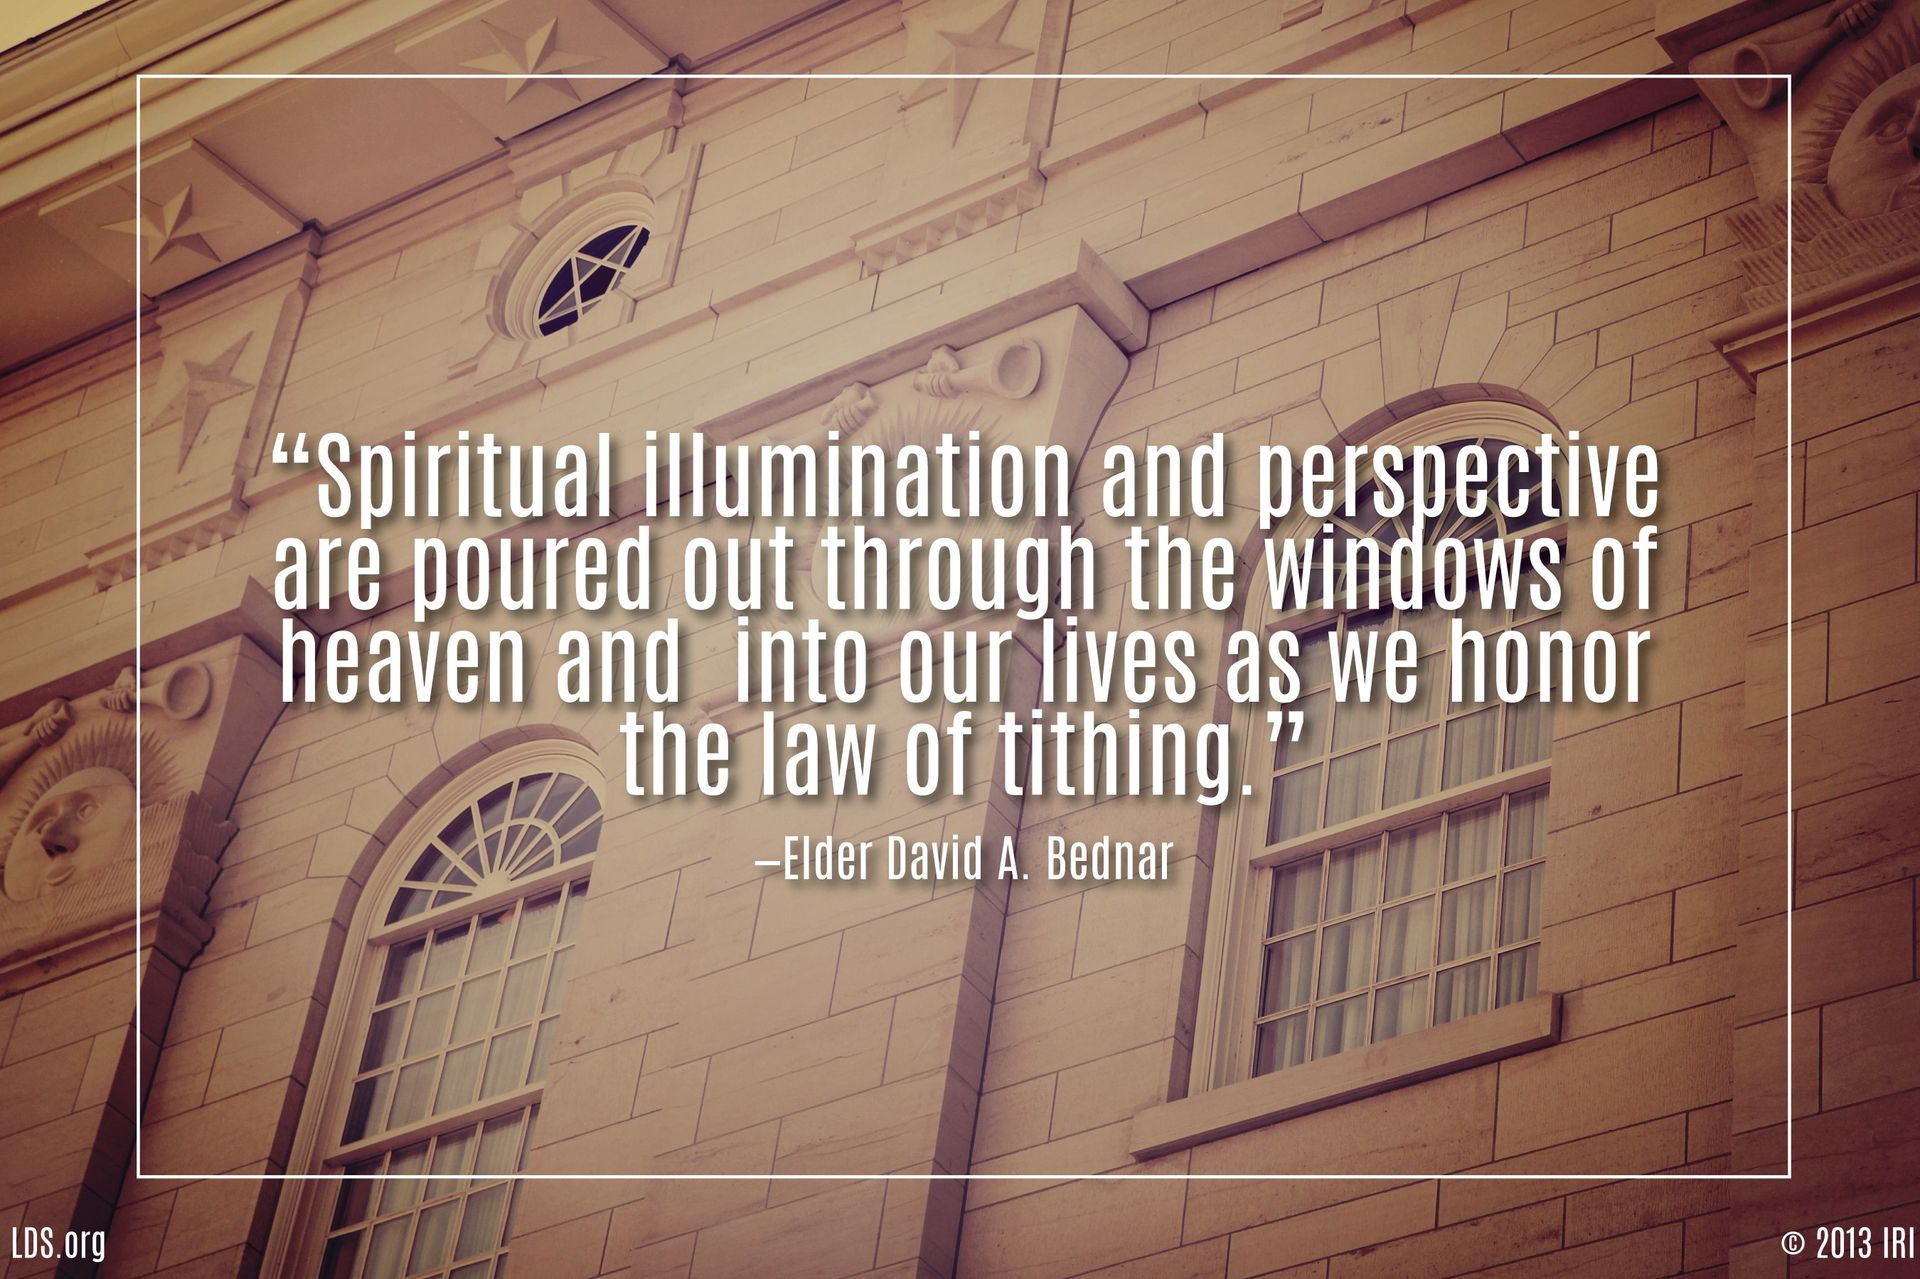 “Spiritual illumination and perspective are poured out through the windows of heaven and into our lives as we honor the law of tithing.”—Elder David A. Bednar, “The Windows of Heaven” © undefined ipCode 1.